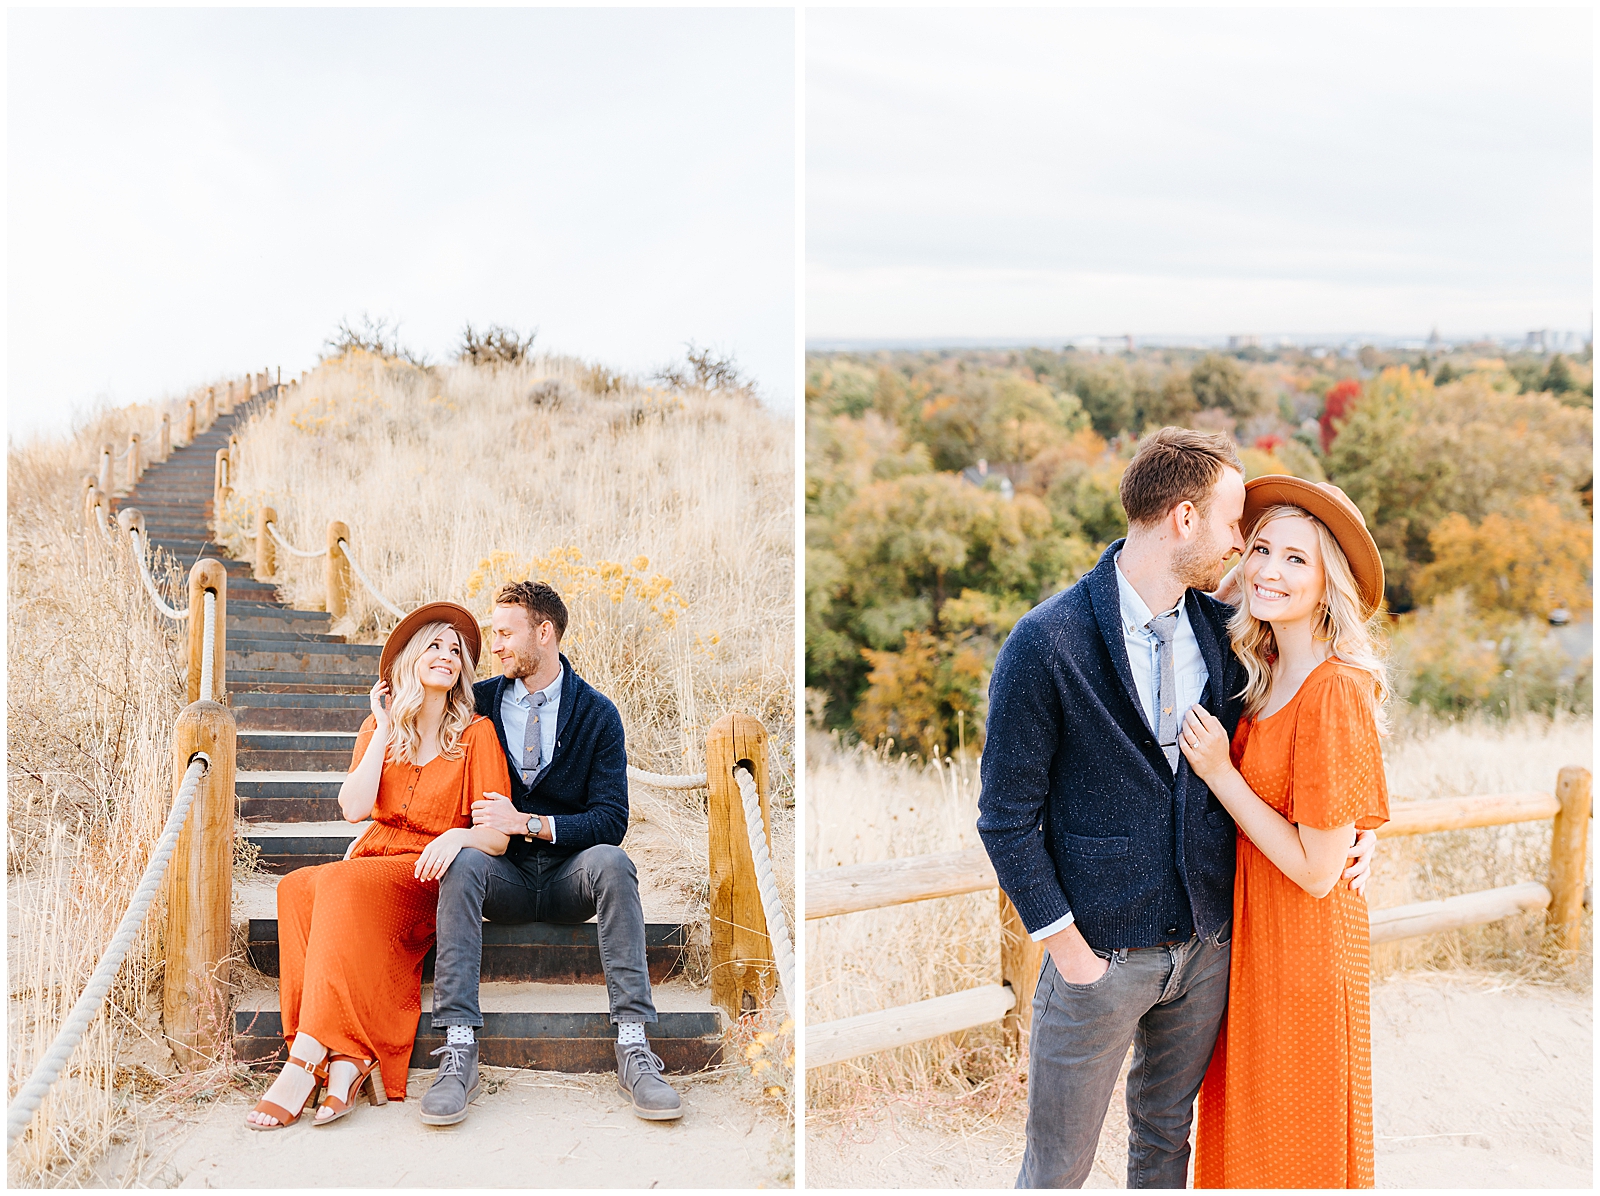 Fall engagement photo outfits: burnt orange dress and hat with navy sweater